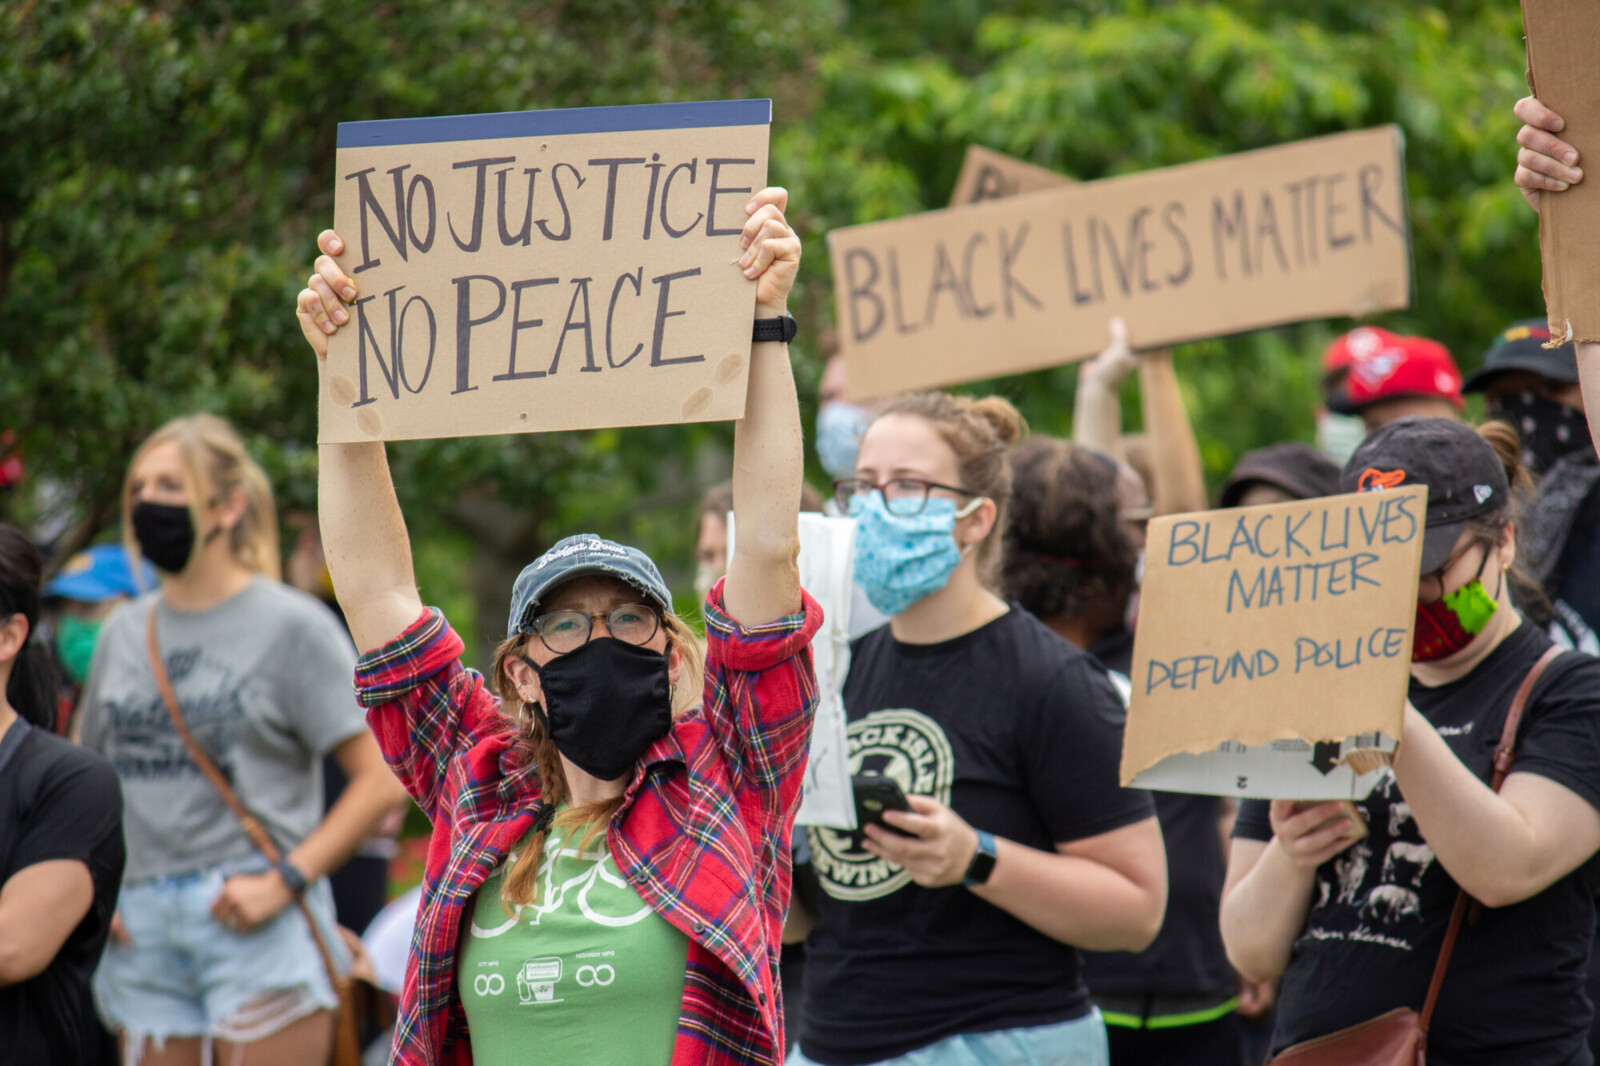 A Quaker call to defund the police